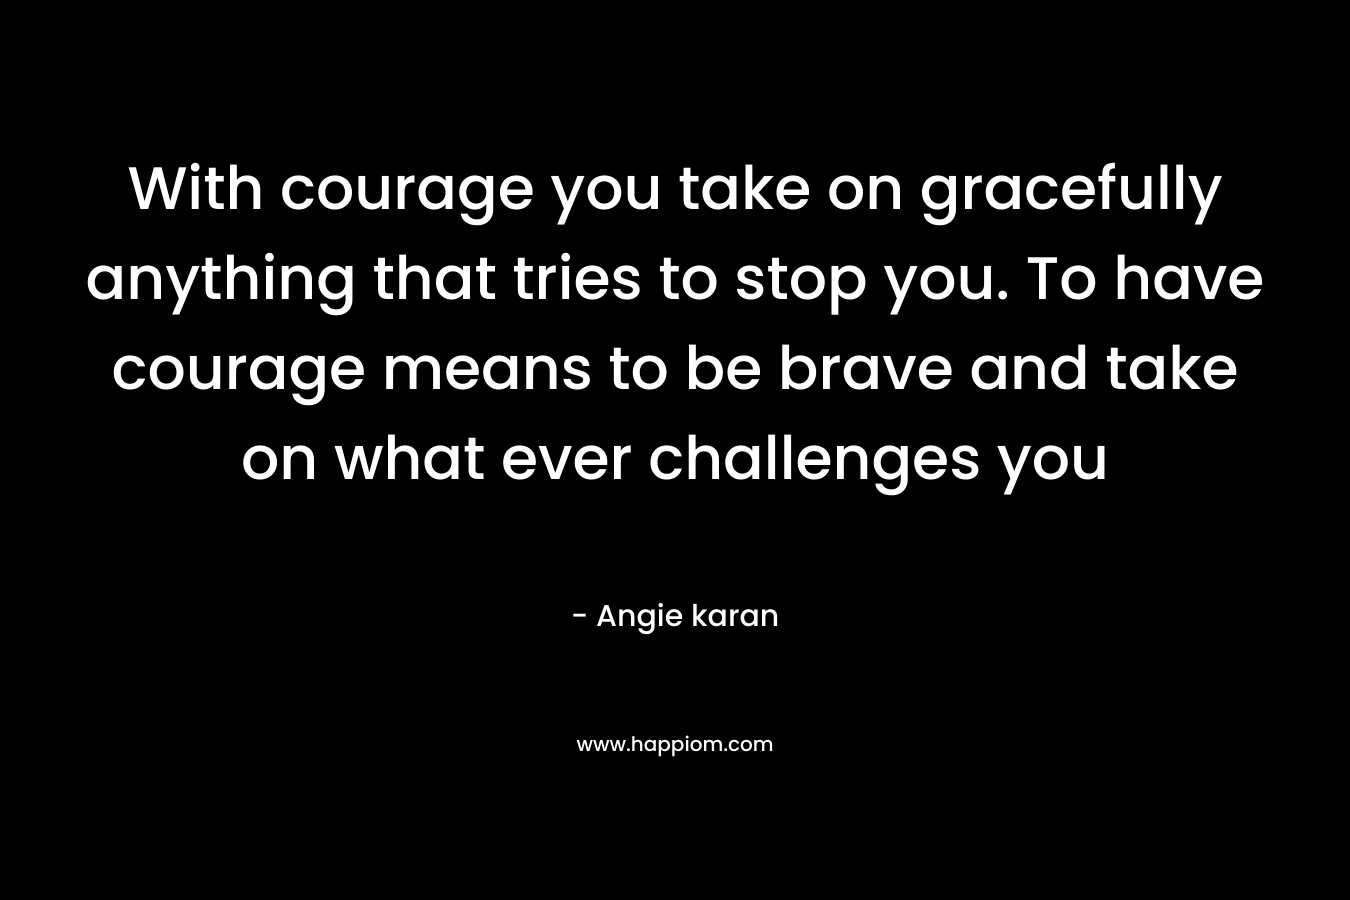 With courage you take on gracefully anything that tries to stop you. To have courage means to be brave and take on what ever challenges you